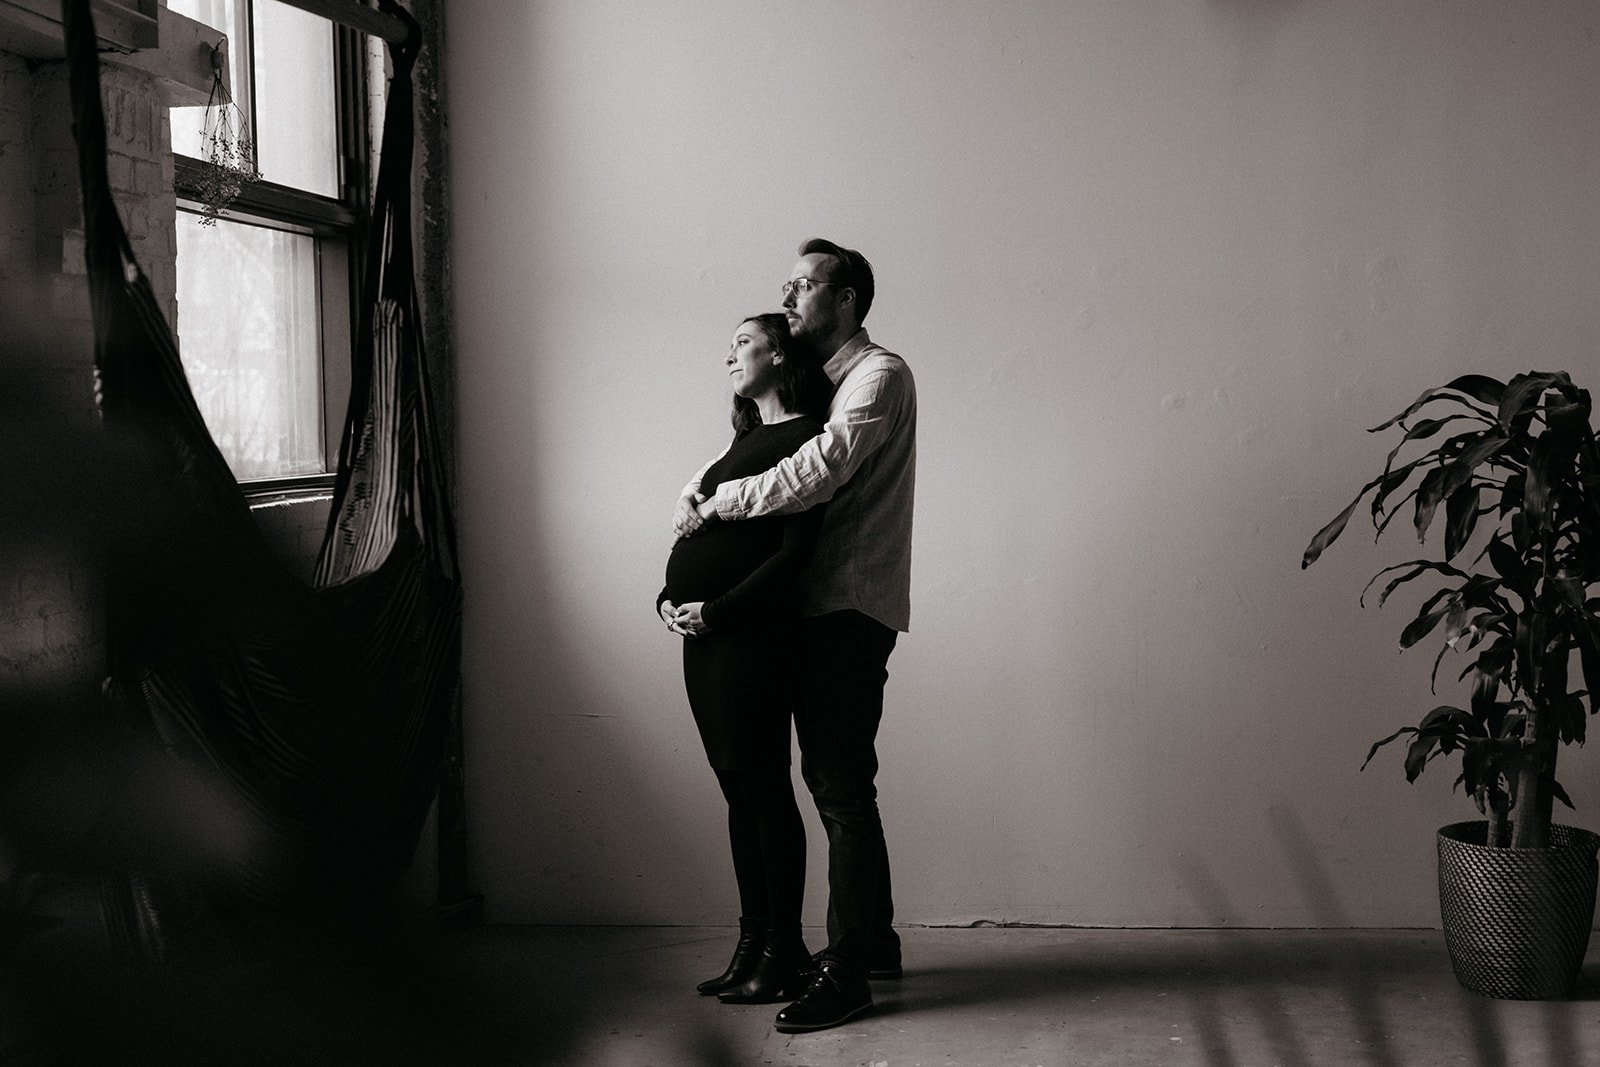 Montreal maternity session. Photographer takes photos of couple in-studio.